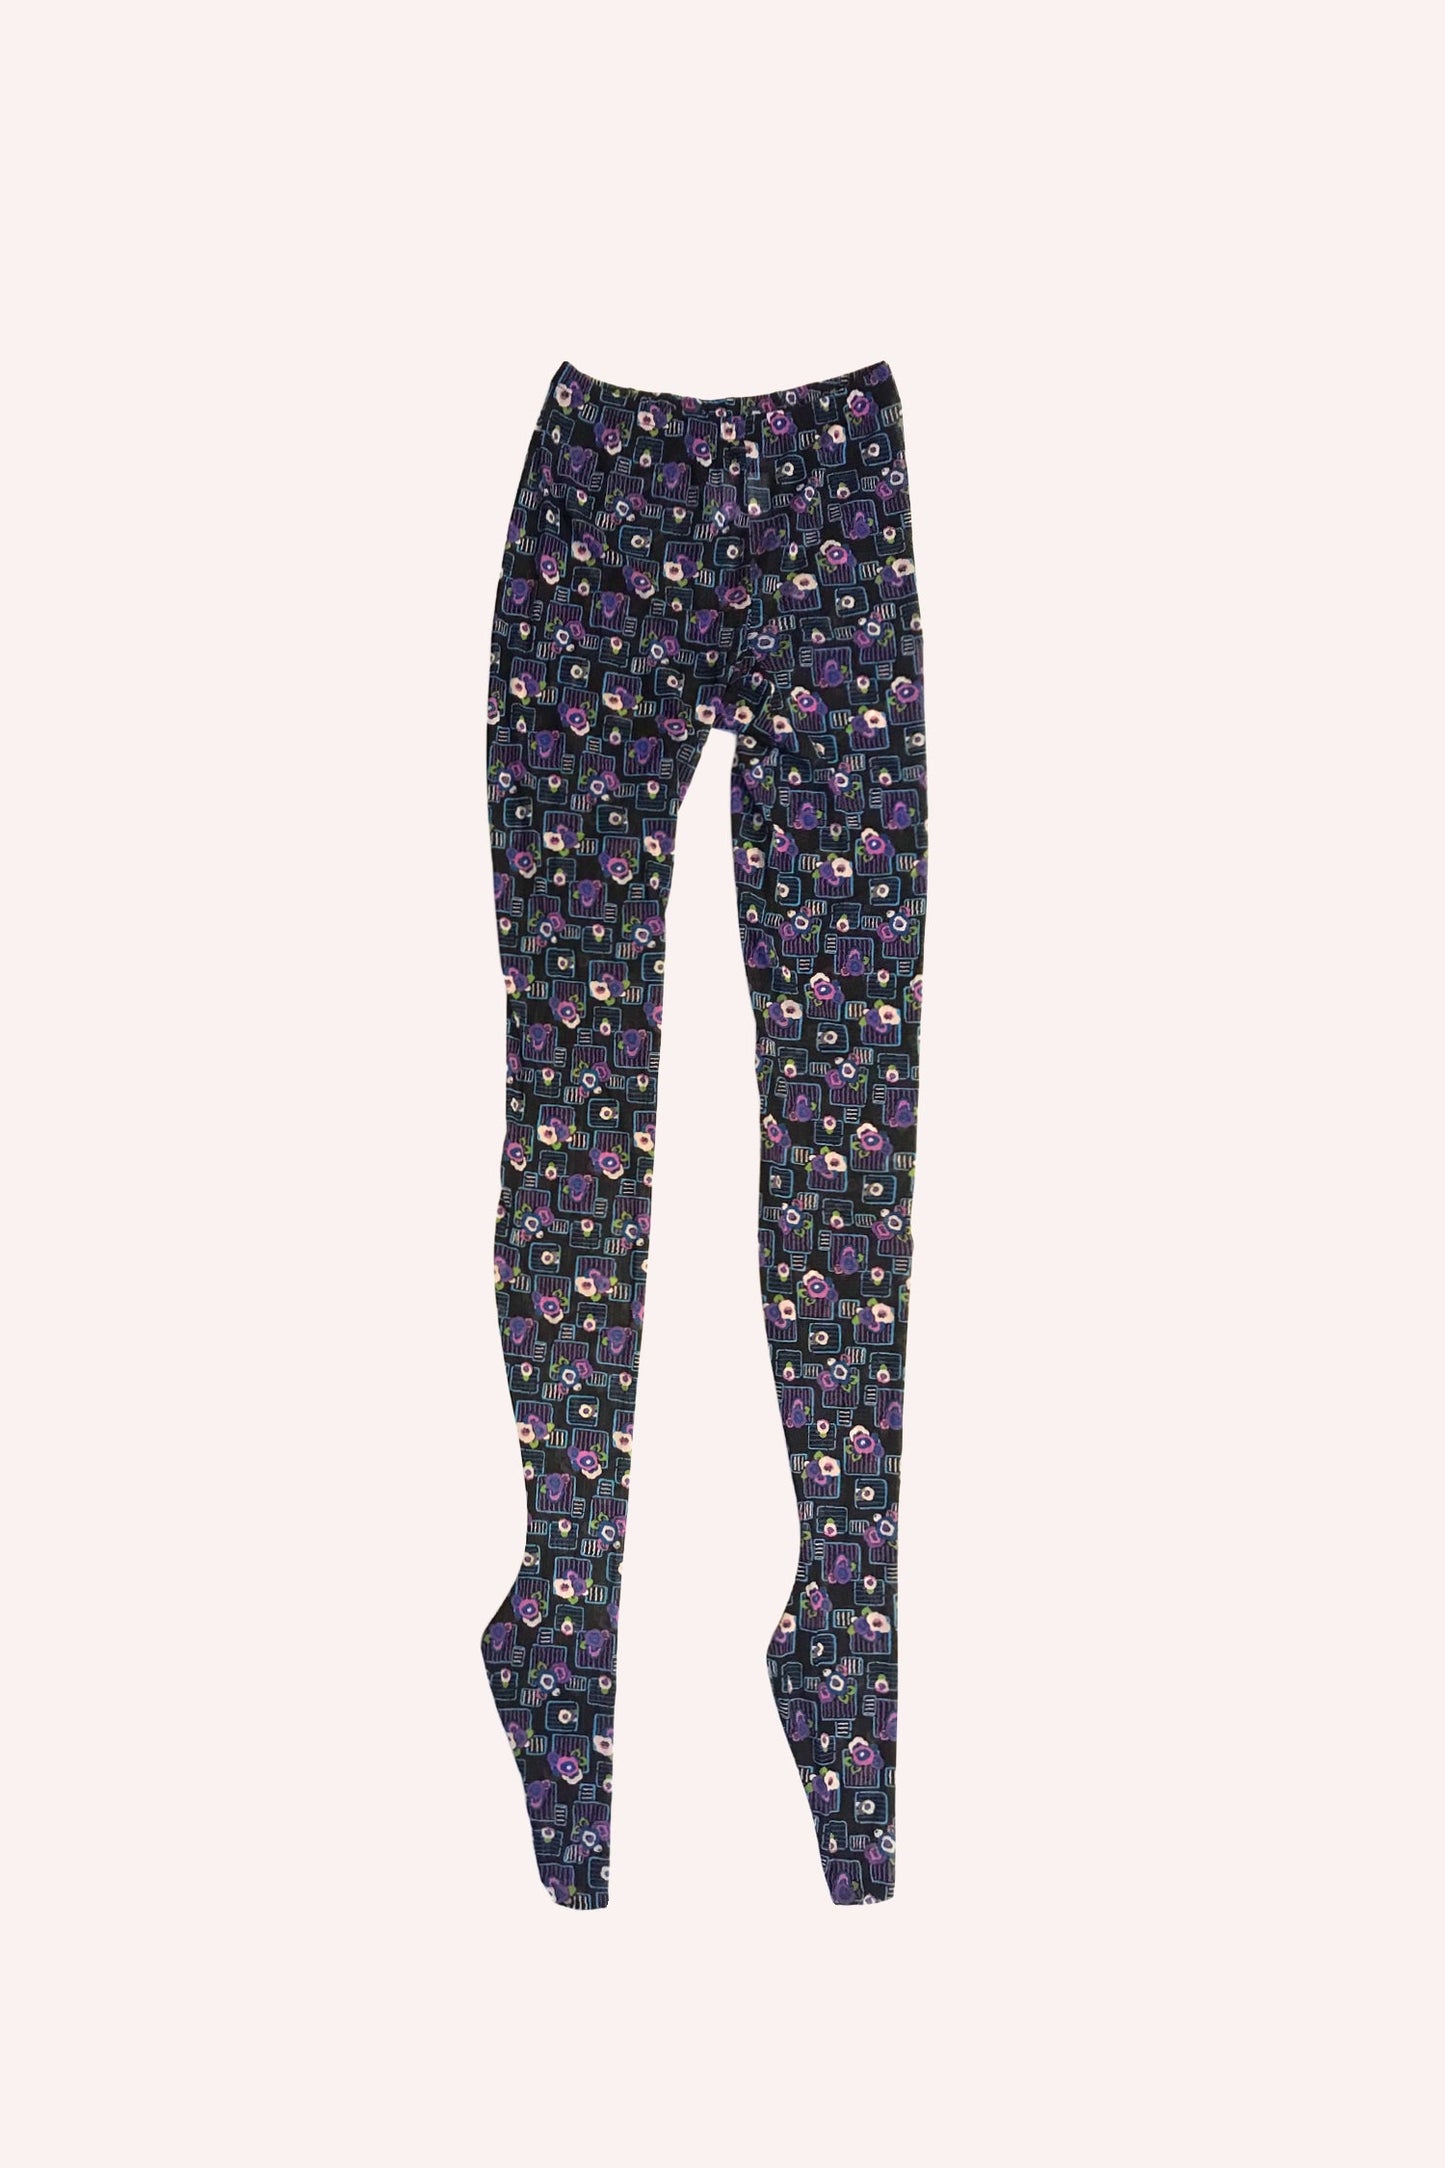 Deco Floral Patch Tights Turquoise, pattern of turquoise and lavender floral design on black